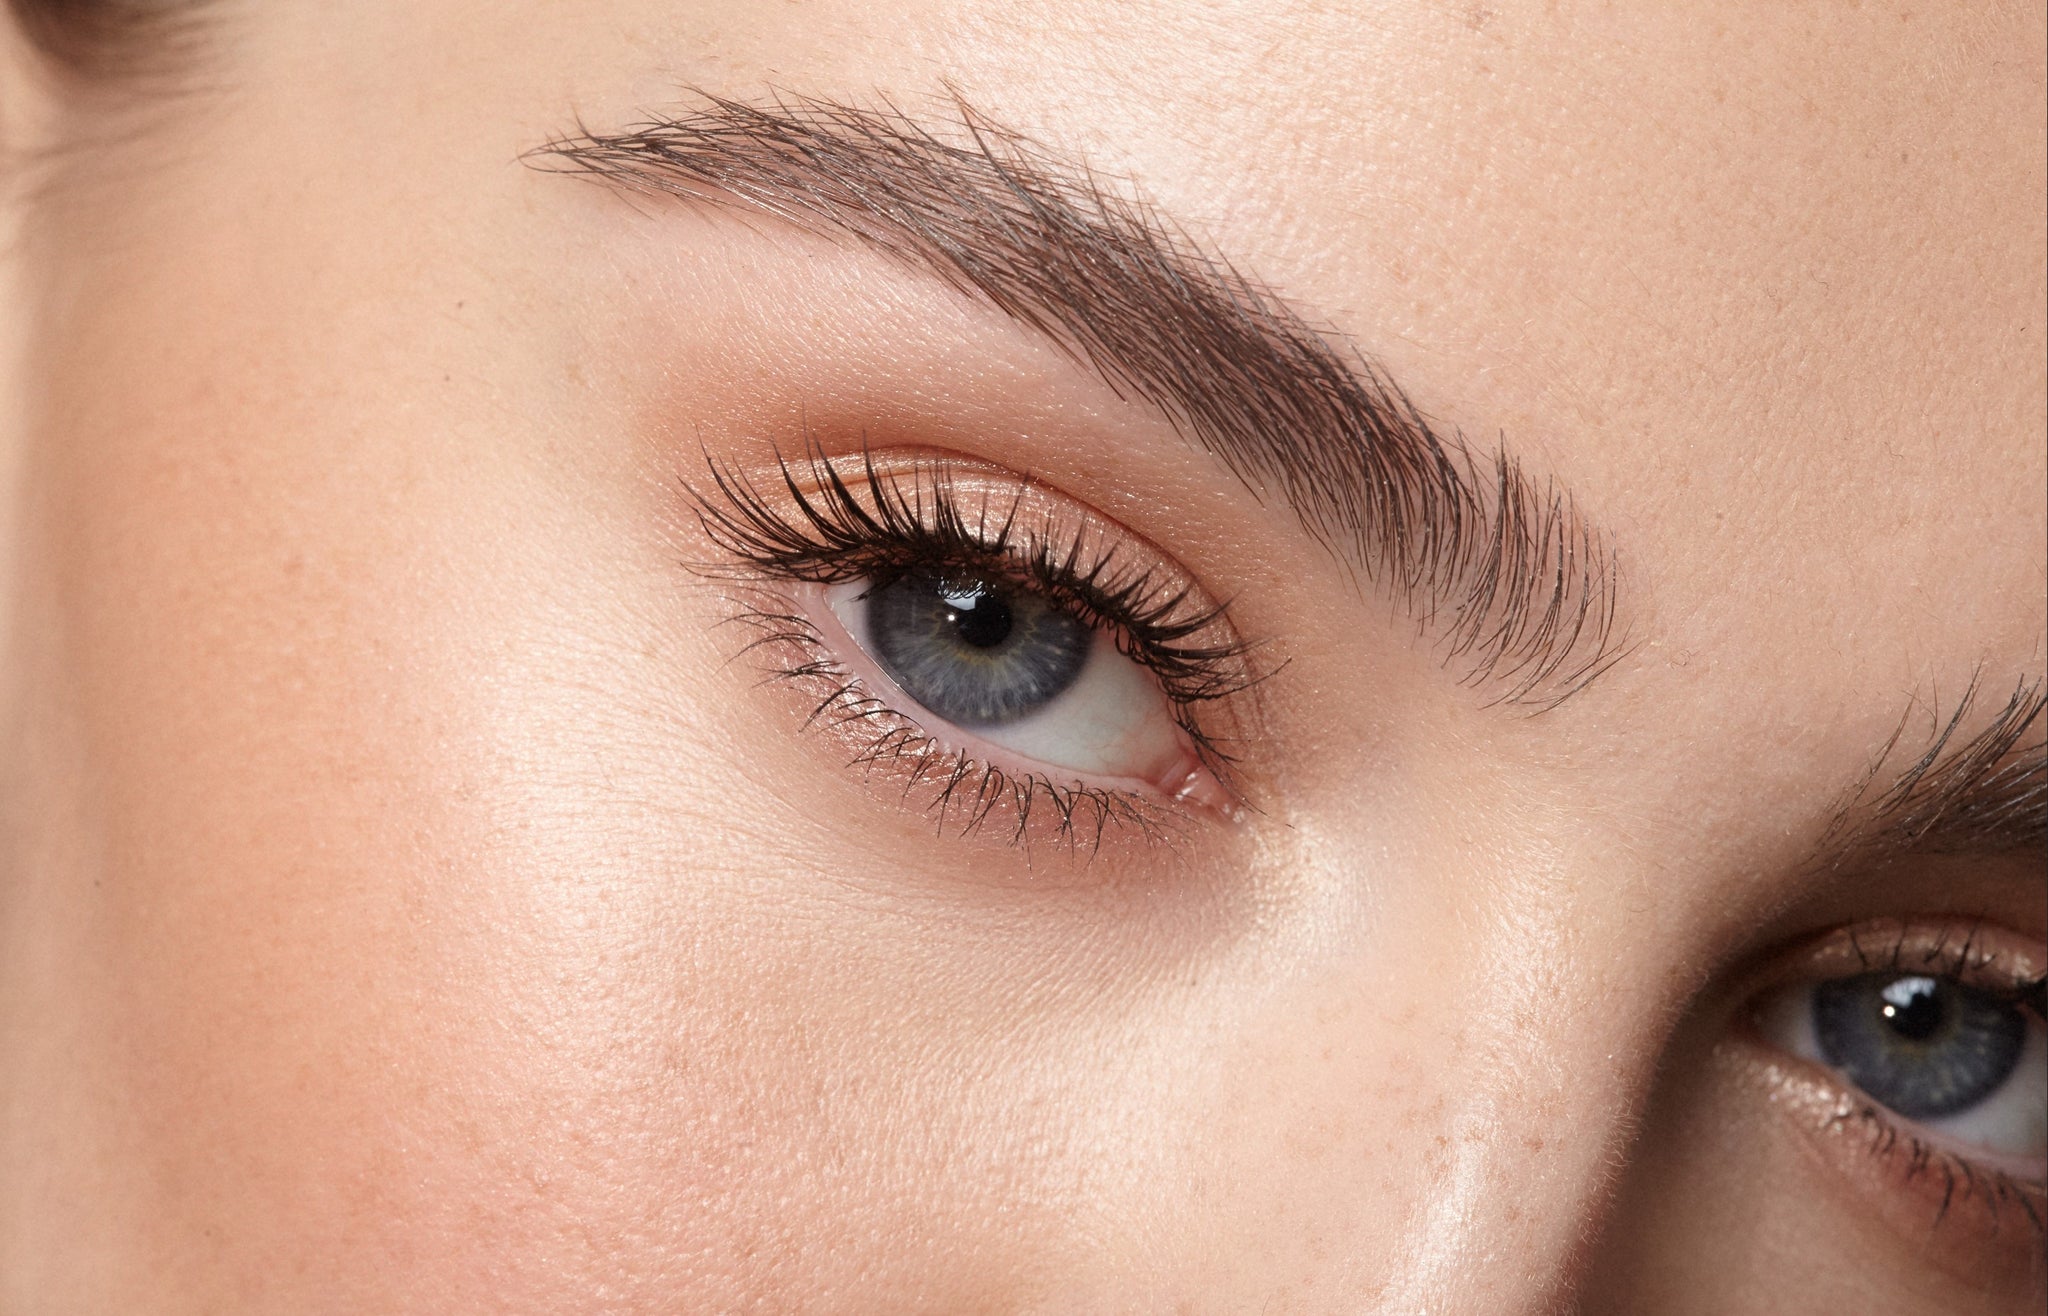 Snowed In? In Goblin Mode? There’s Never Been A Better Time To Grow Out Your Brows